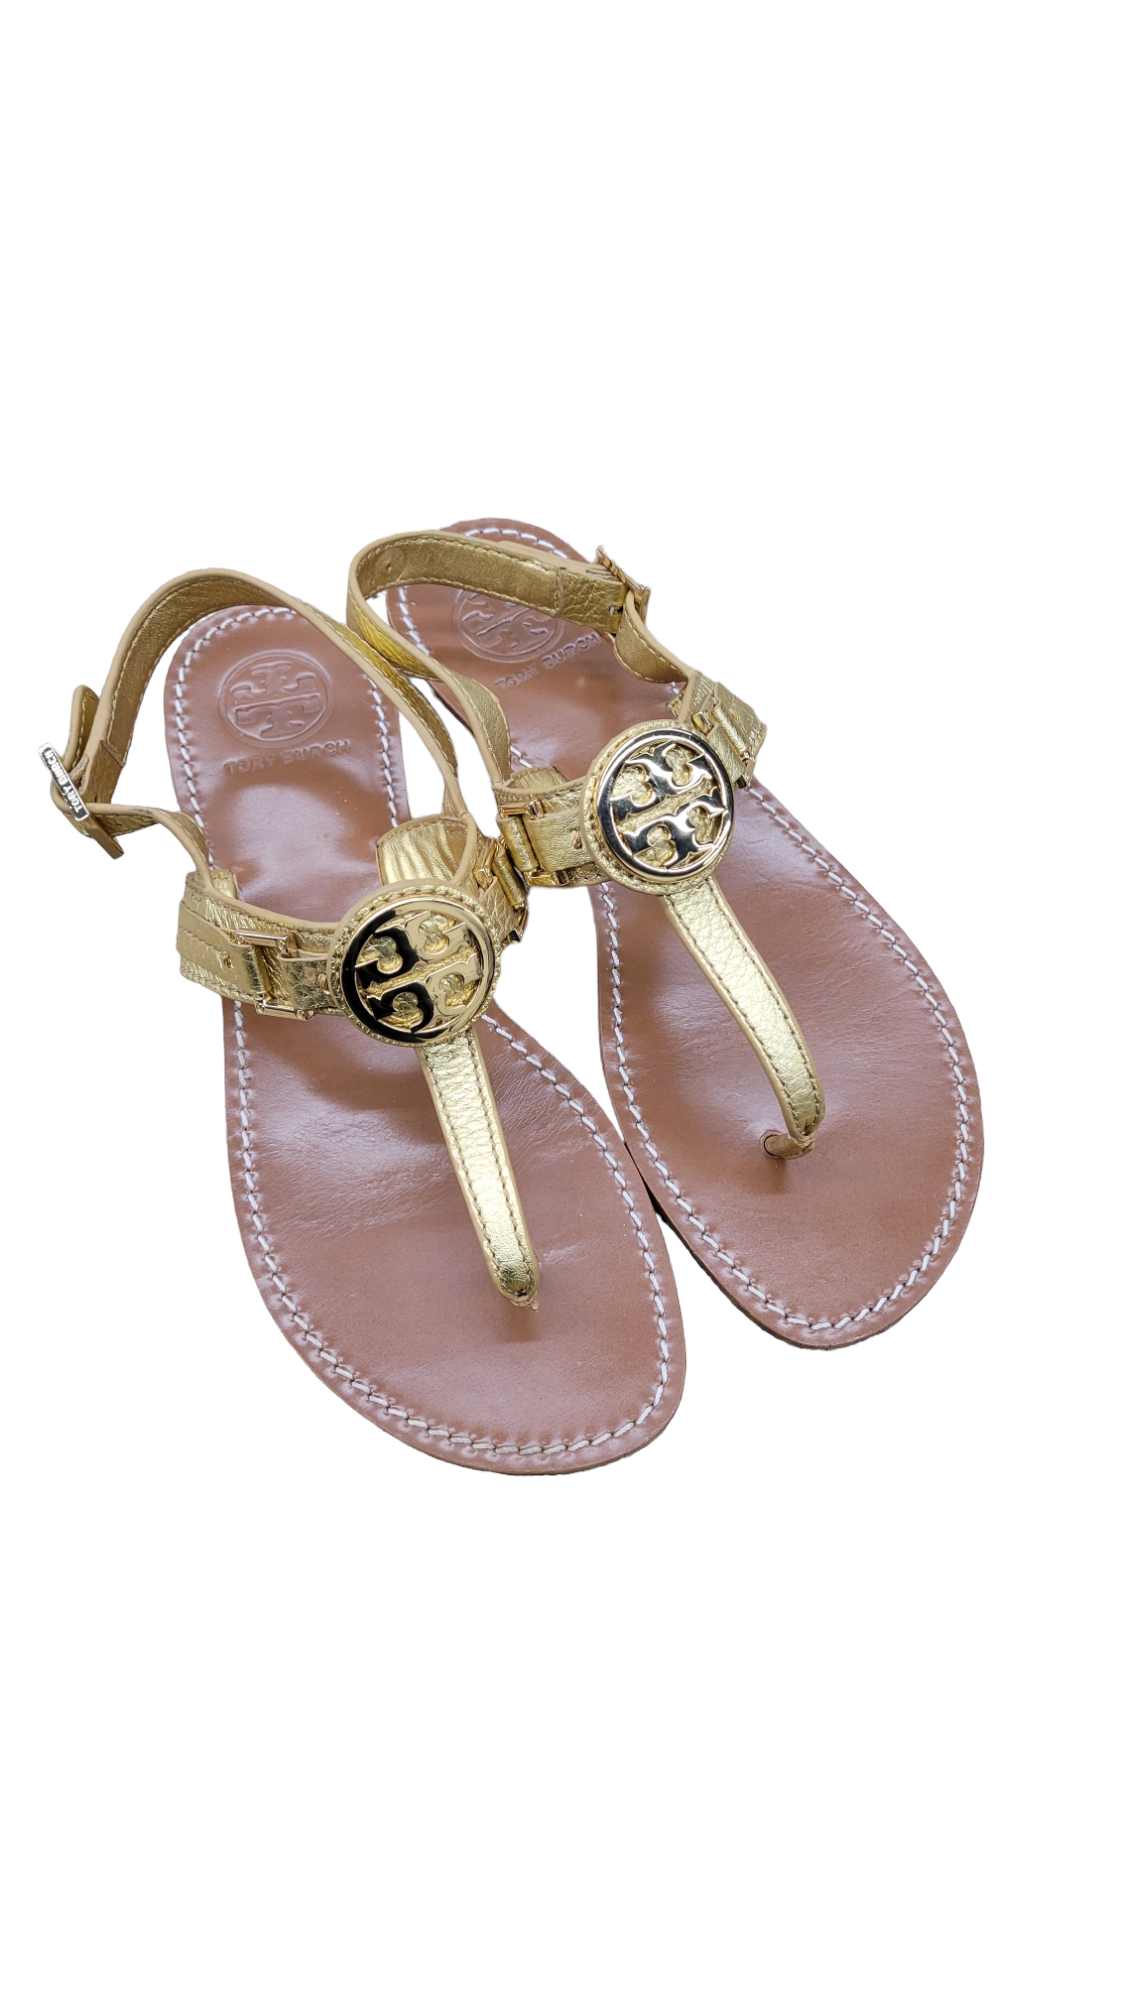 Sandals Flats By Tory Burch Size: 8 – Clothes Mentor Peoria IL #220